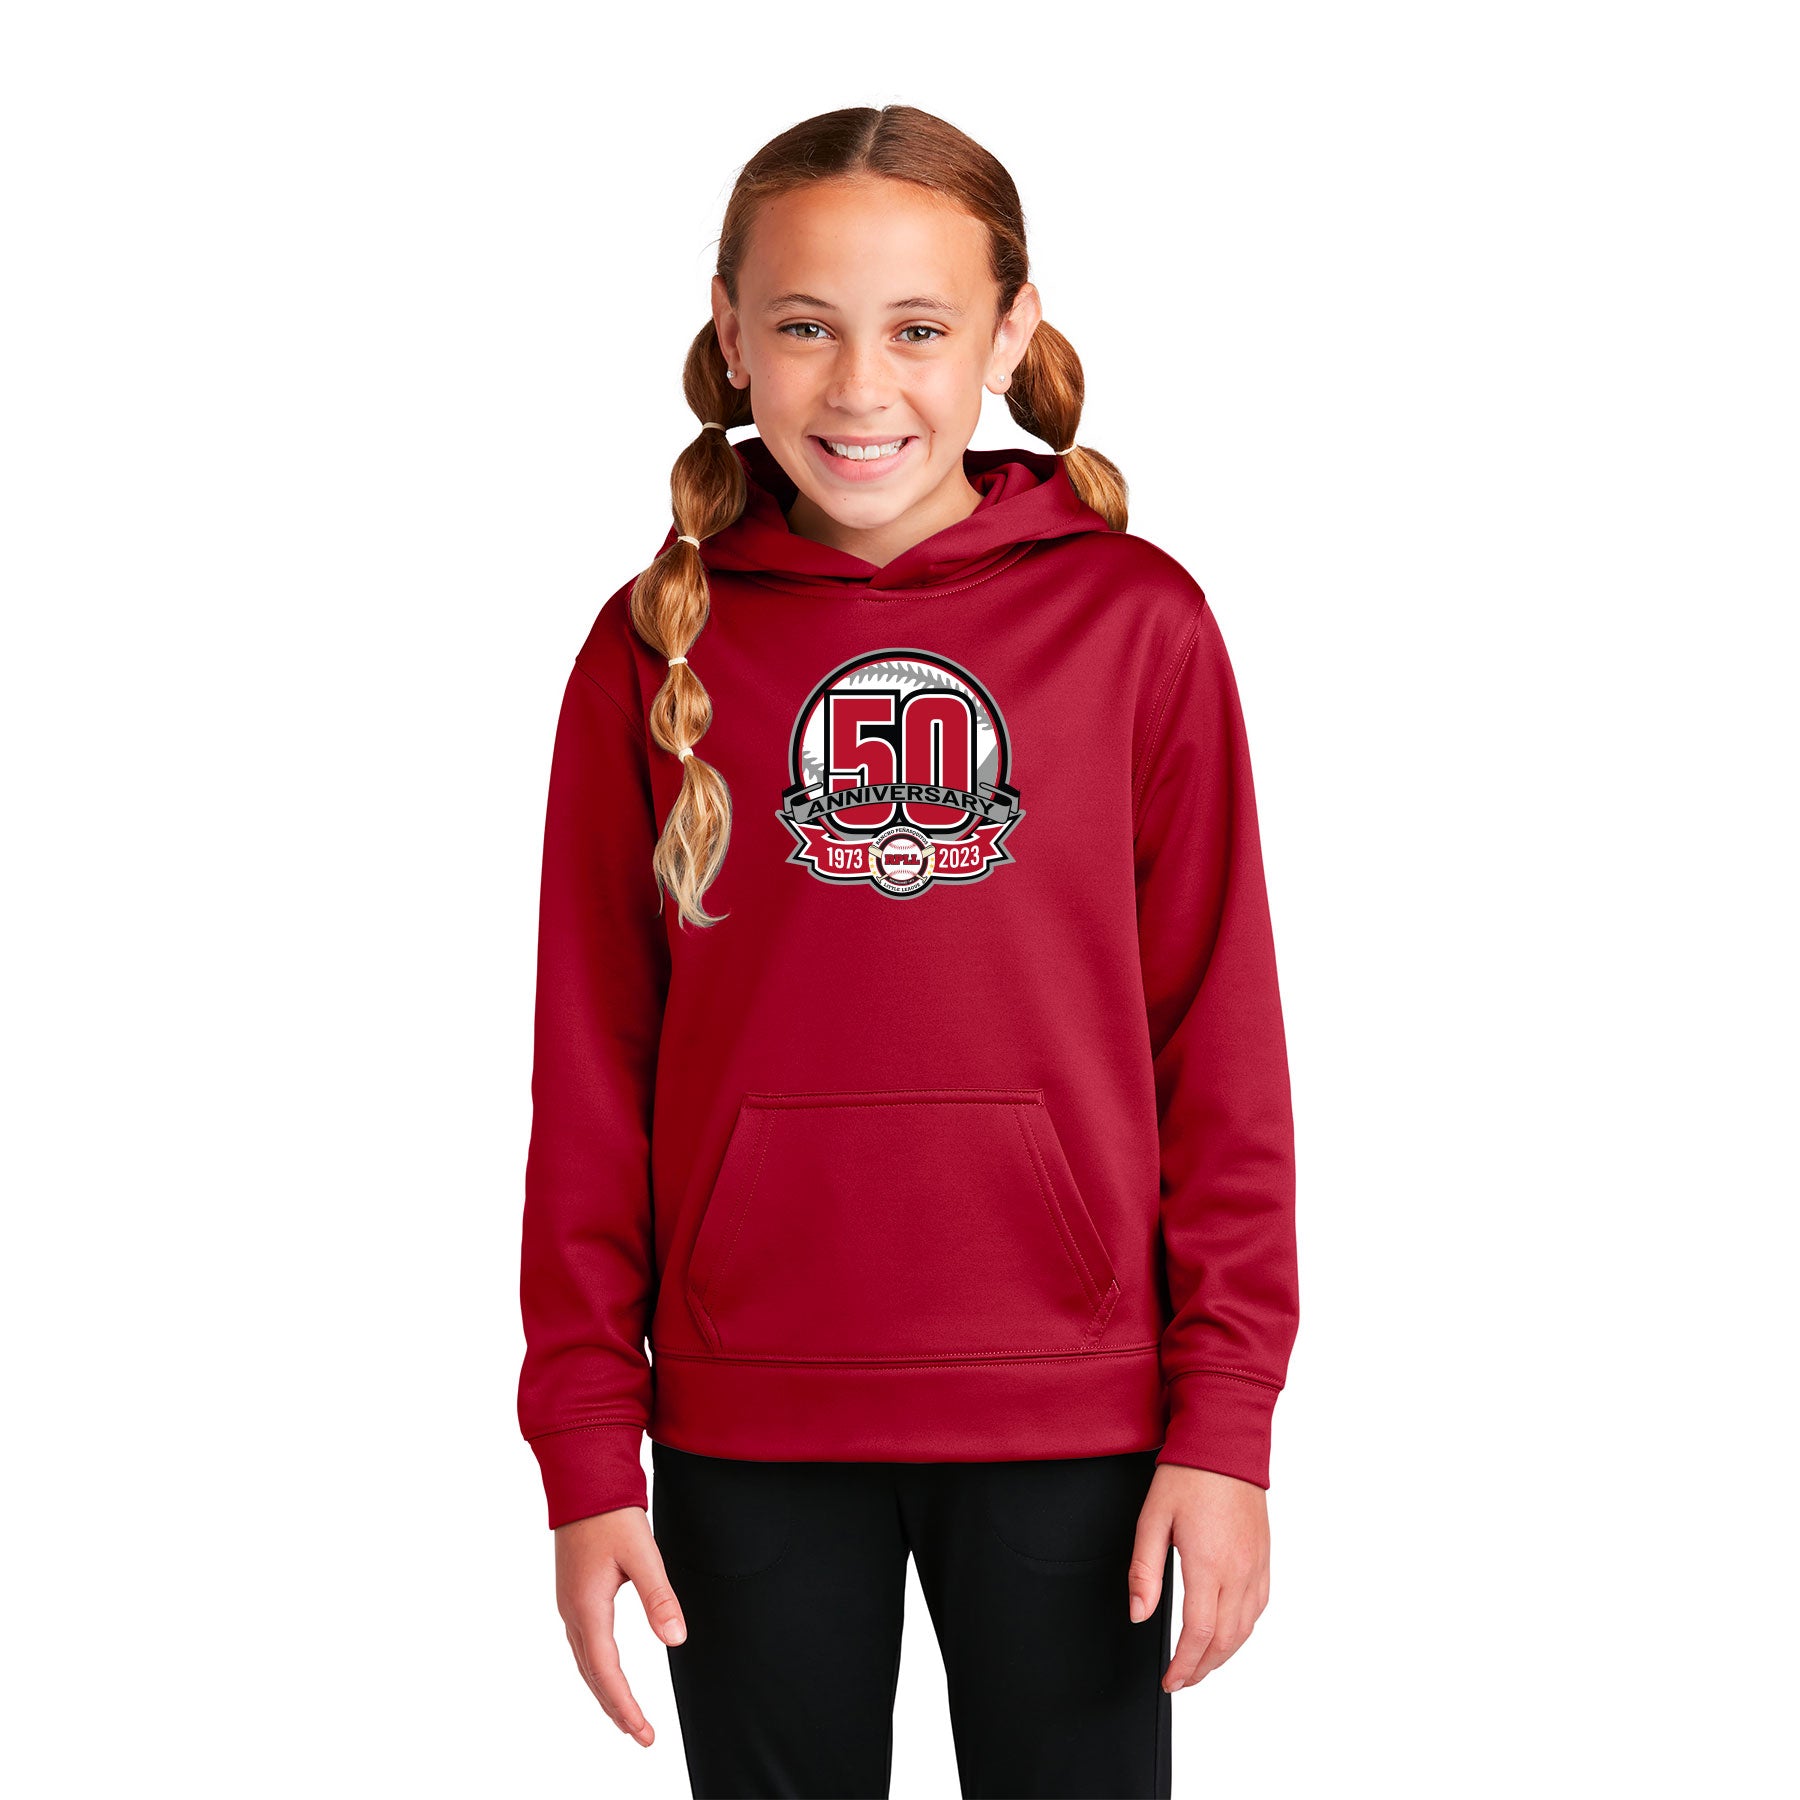 RPLL 50 PATCH ADULT & YOUTH PERFORMANCE HOODED SWEATSHIRT